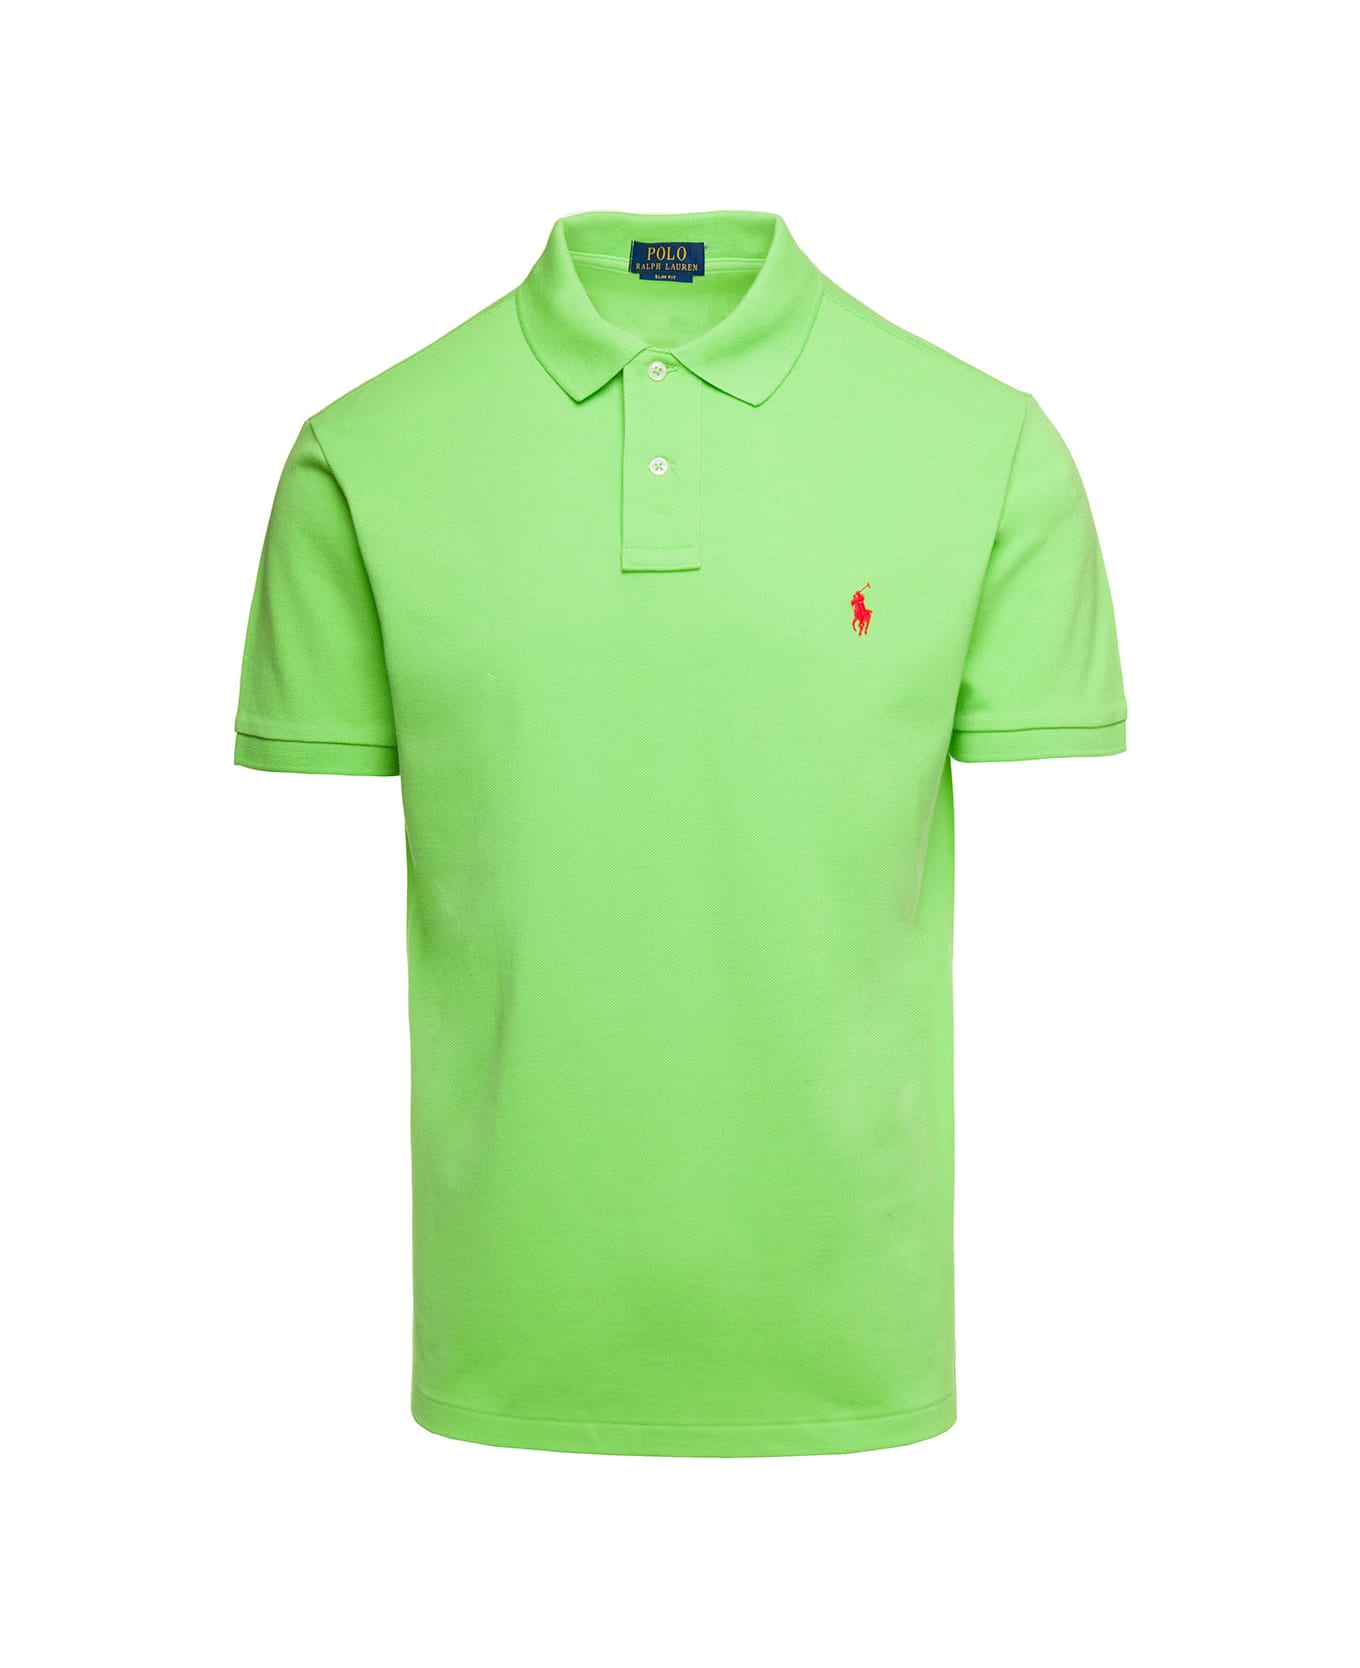 Polo Ralph Lauren Light Green And Red Slim-fit Pique Polo Shirt - Verde